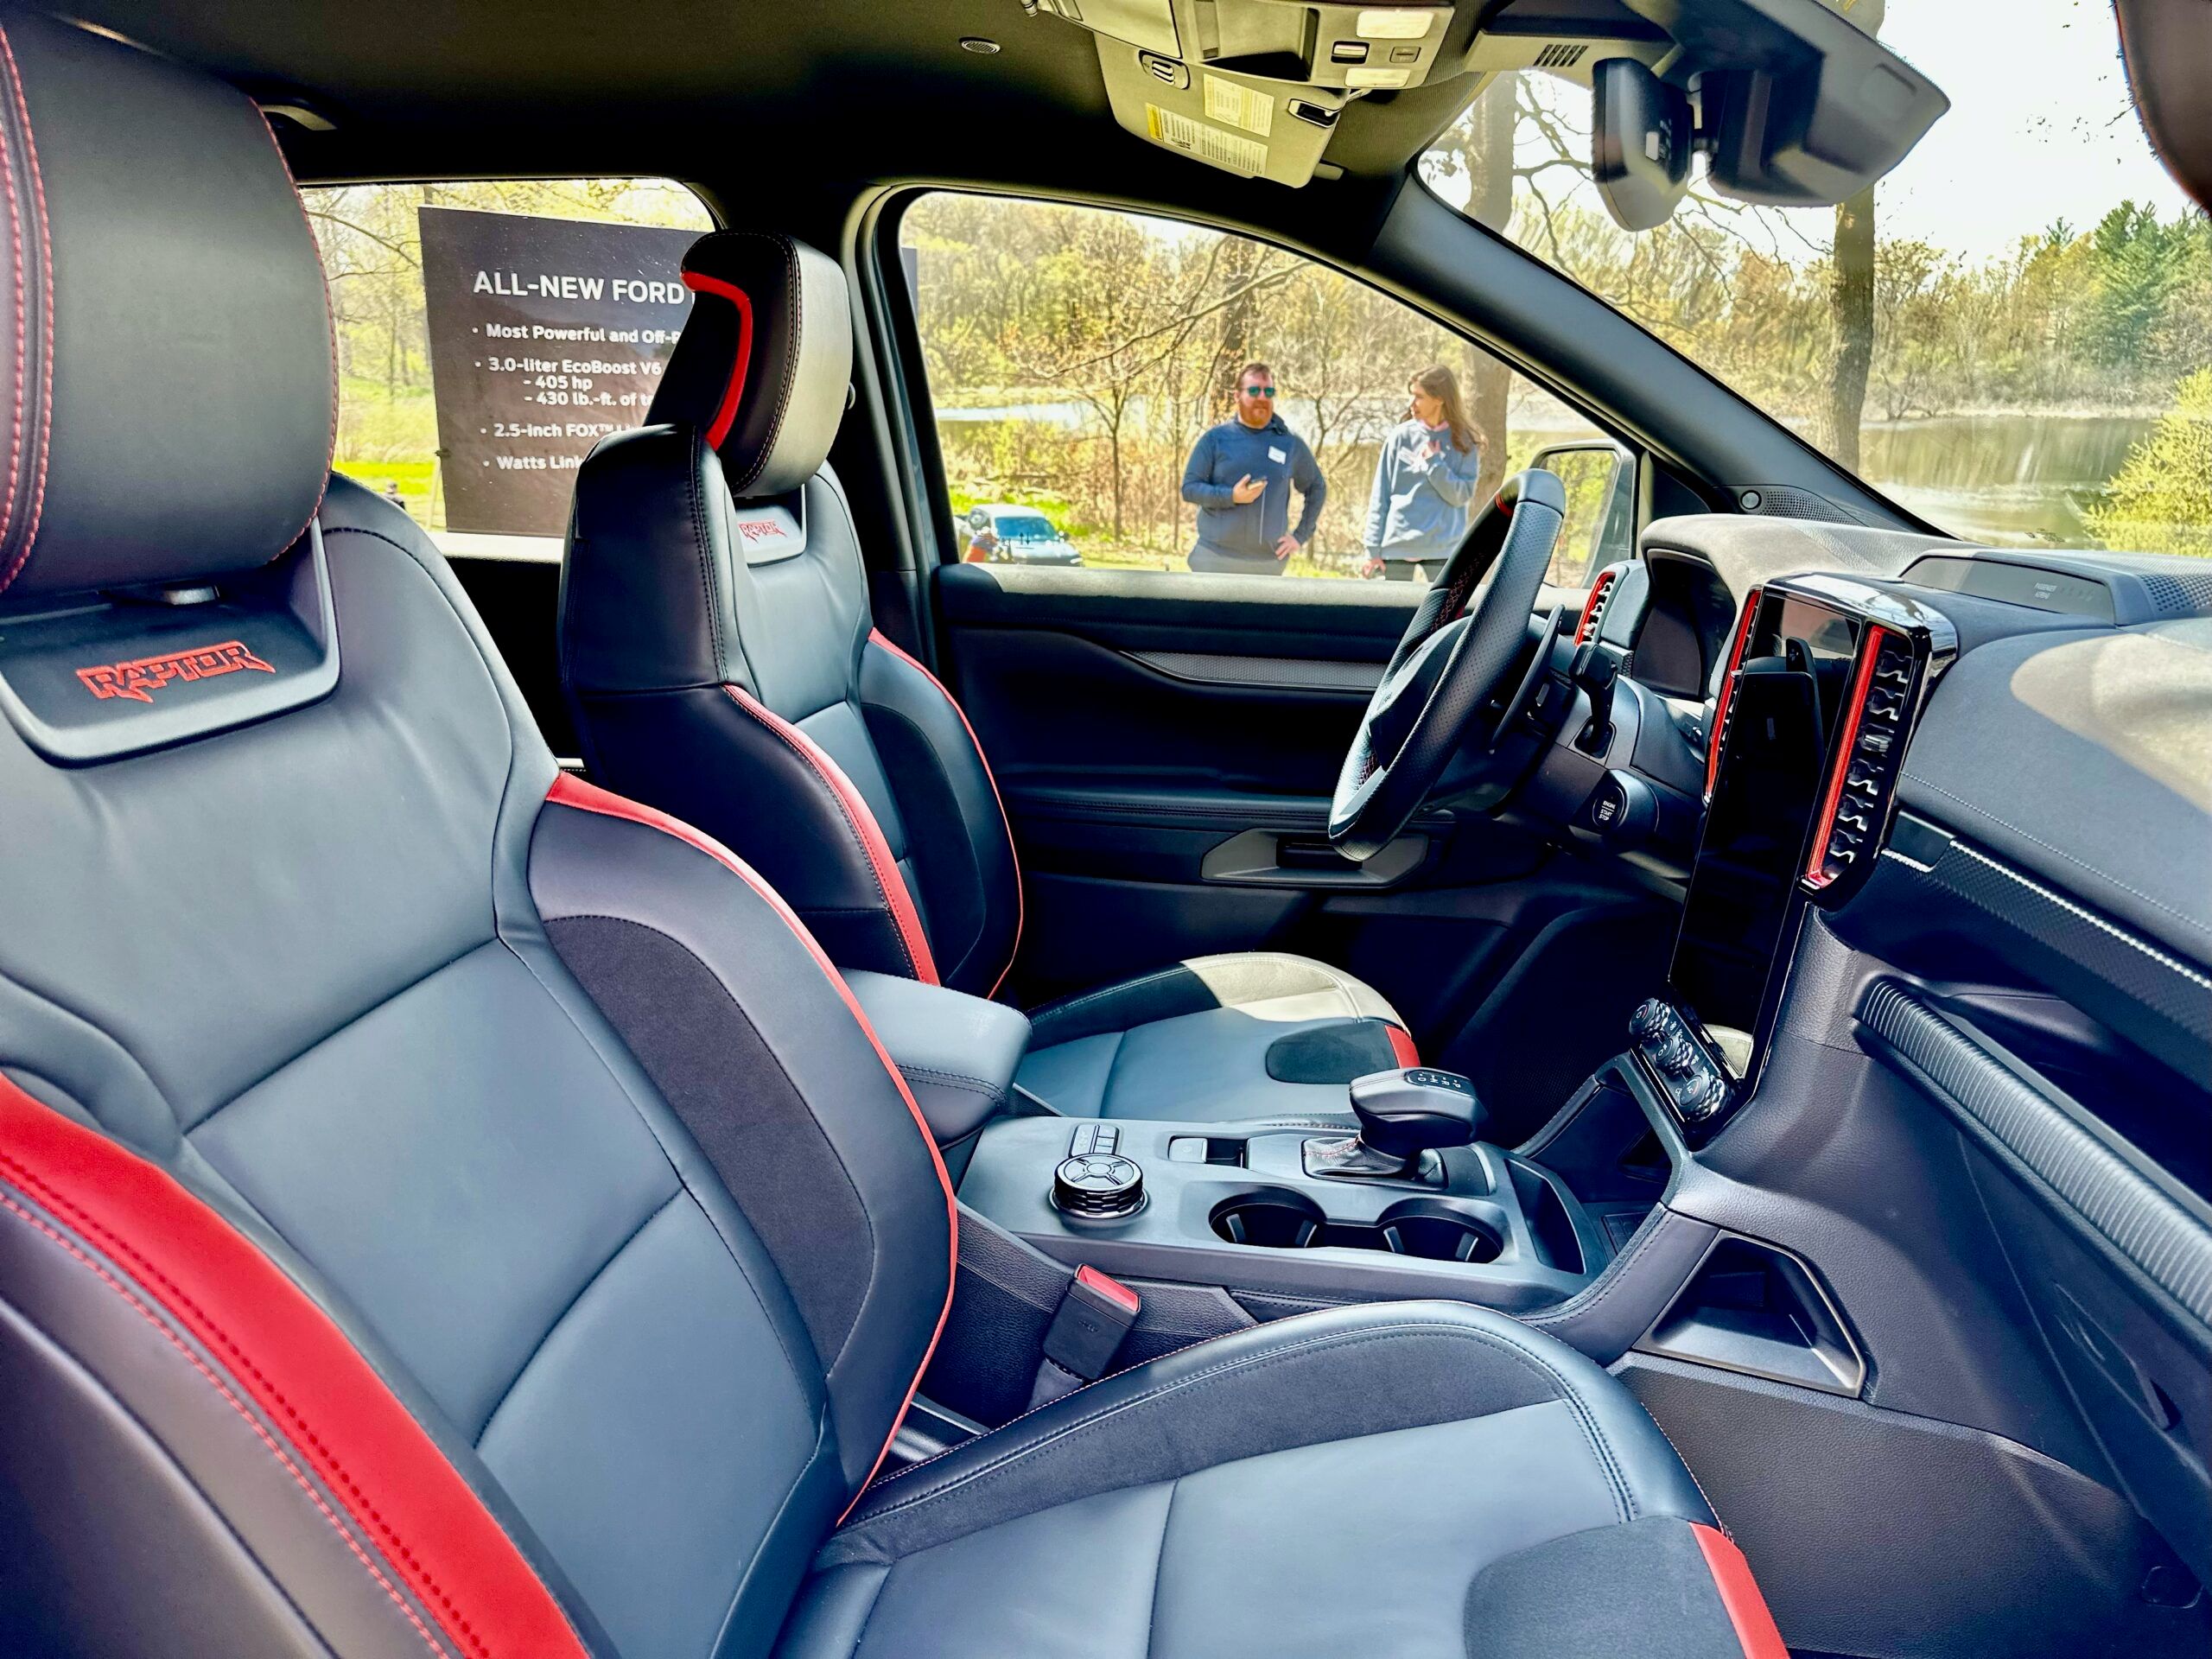 The Interior Of The Rod Ranger Raptor. Note Those Bolstered Seats Intended To Keep You Comfortable On The Off Road Trail Scaled 